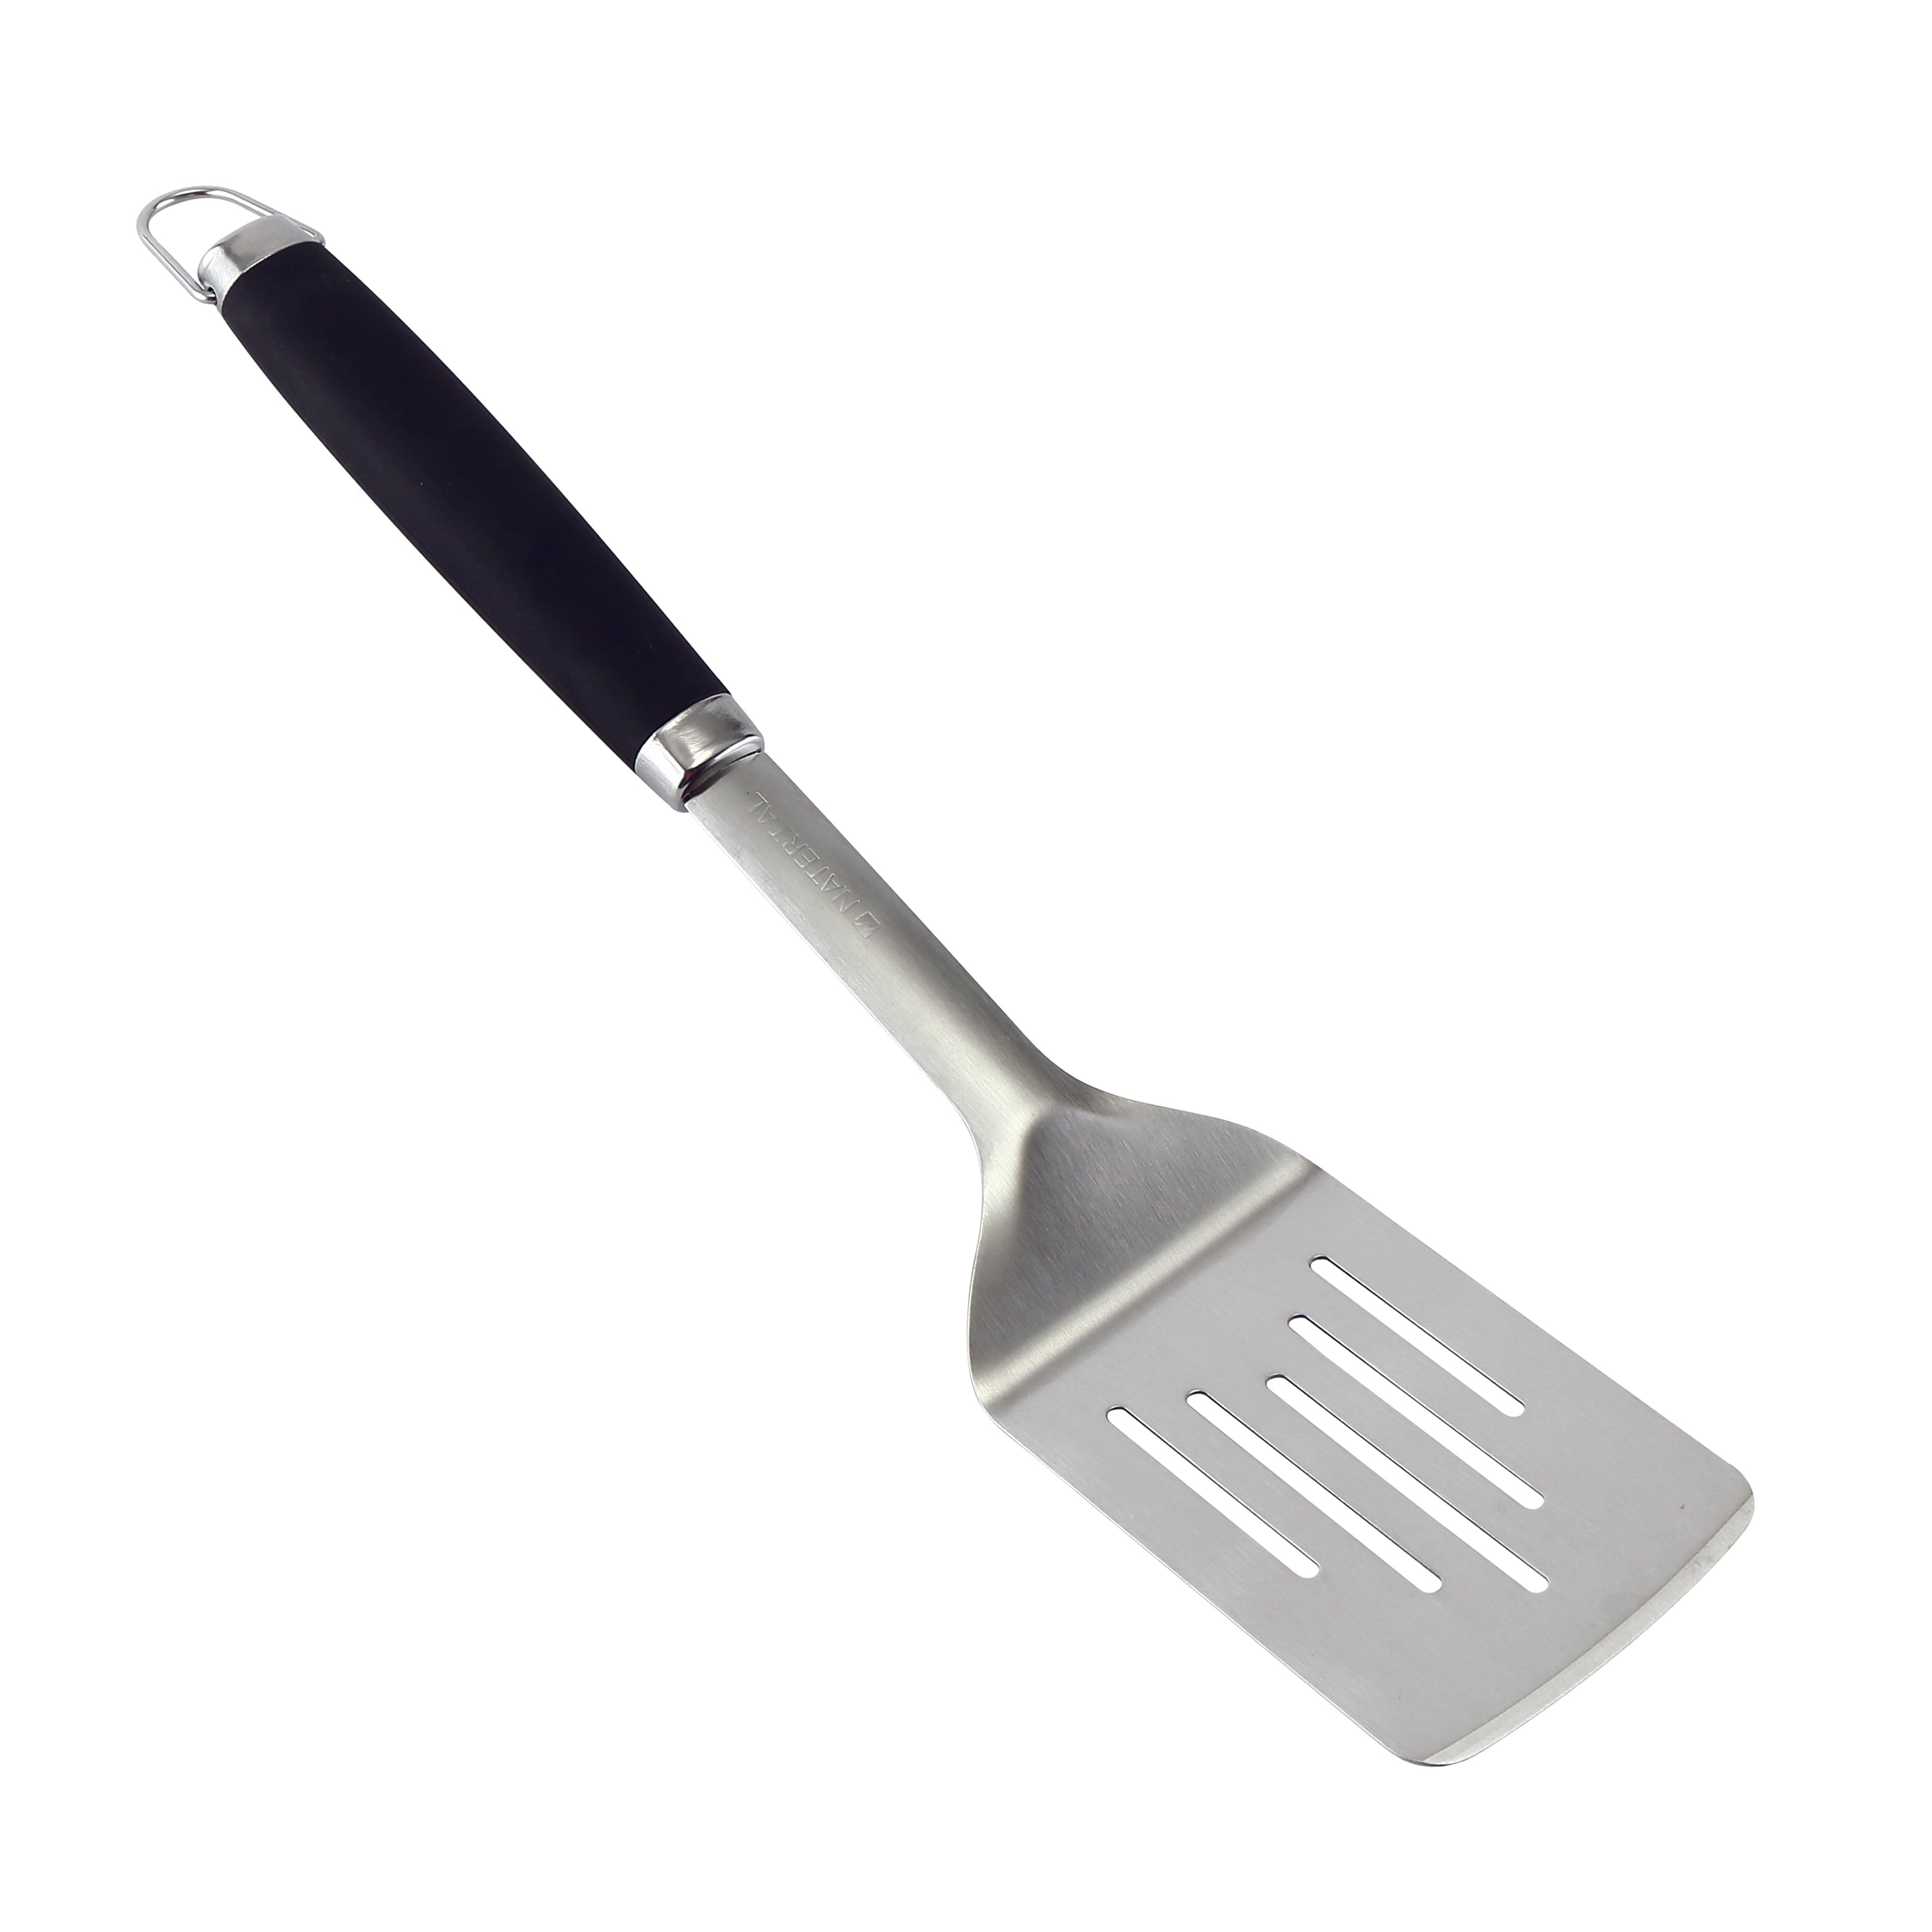 STAINLESS STEEL FOOD SPATULA - best price from Maltashopper.com BR500009591